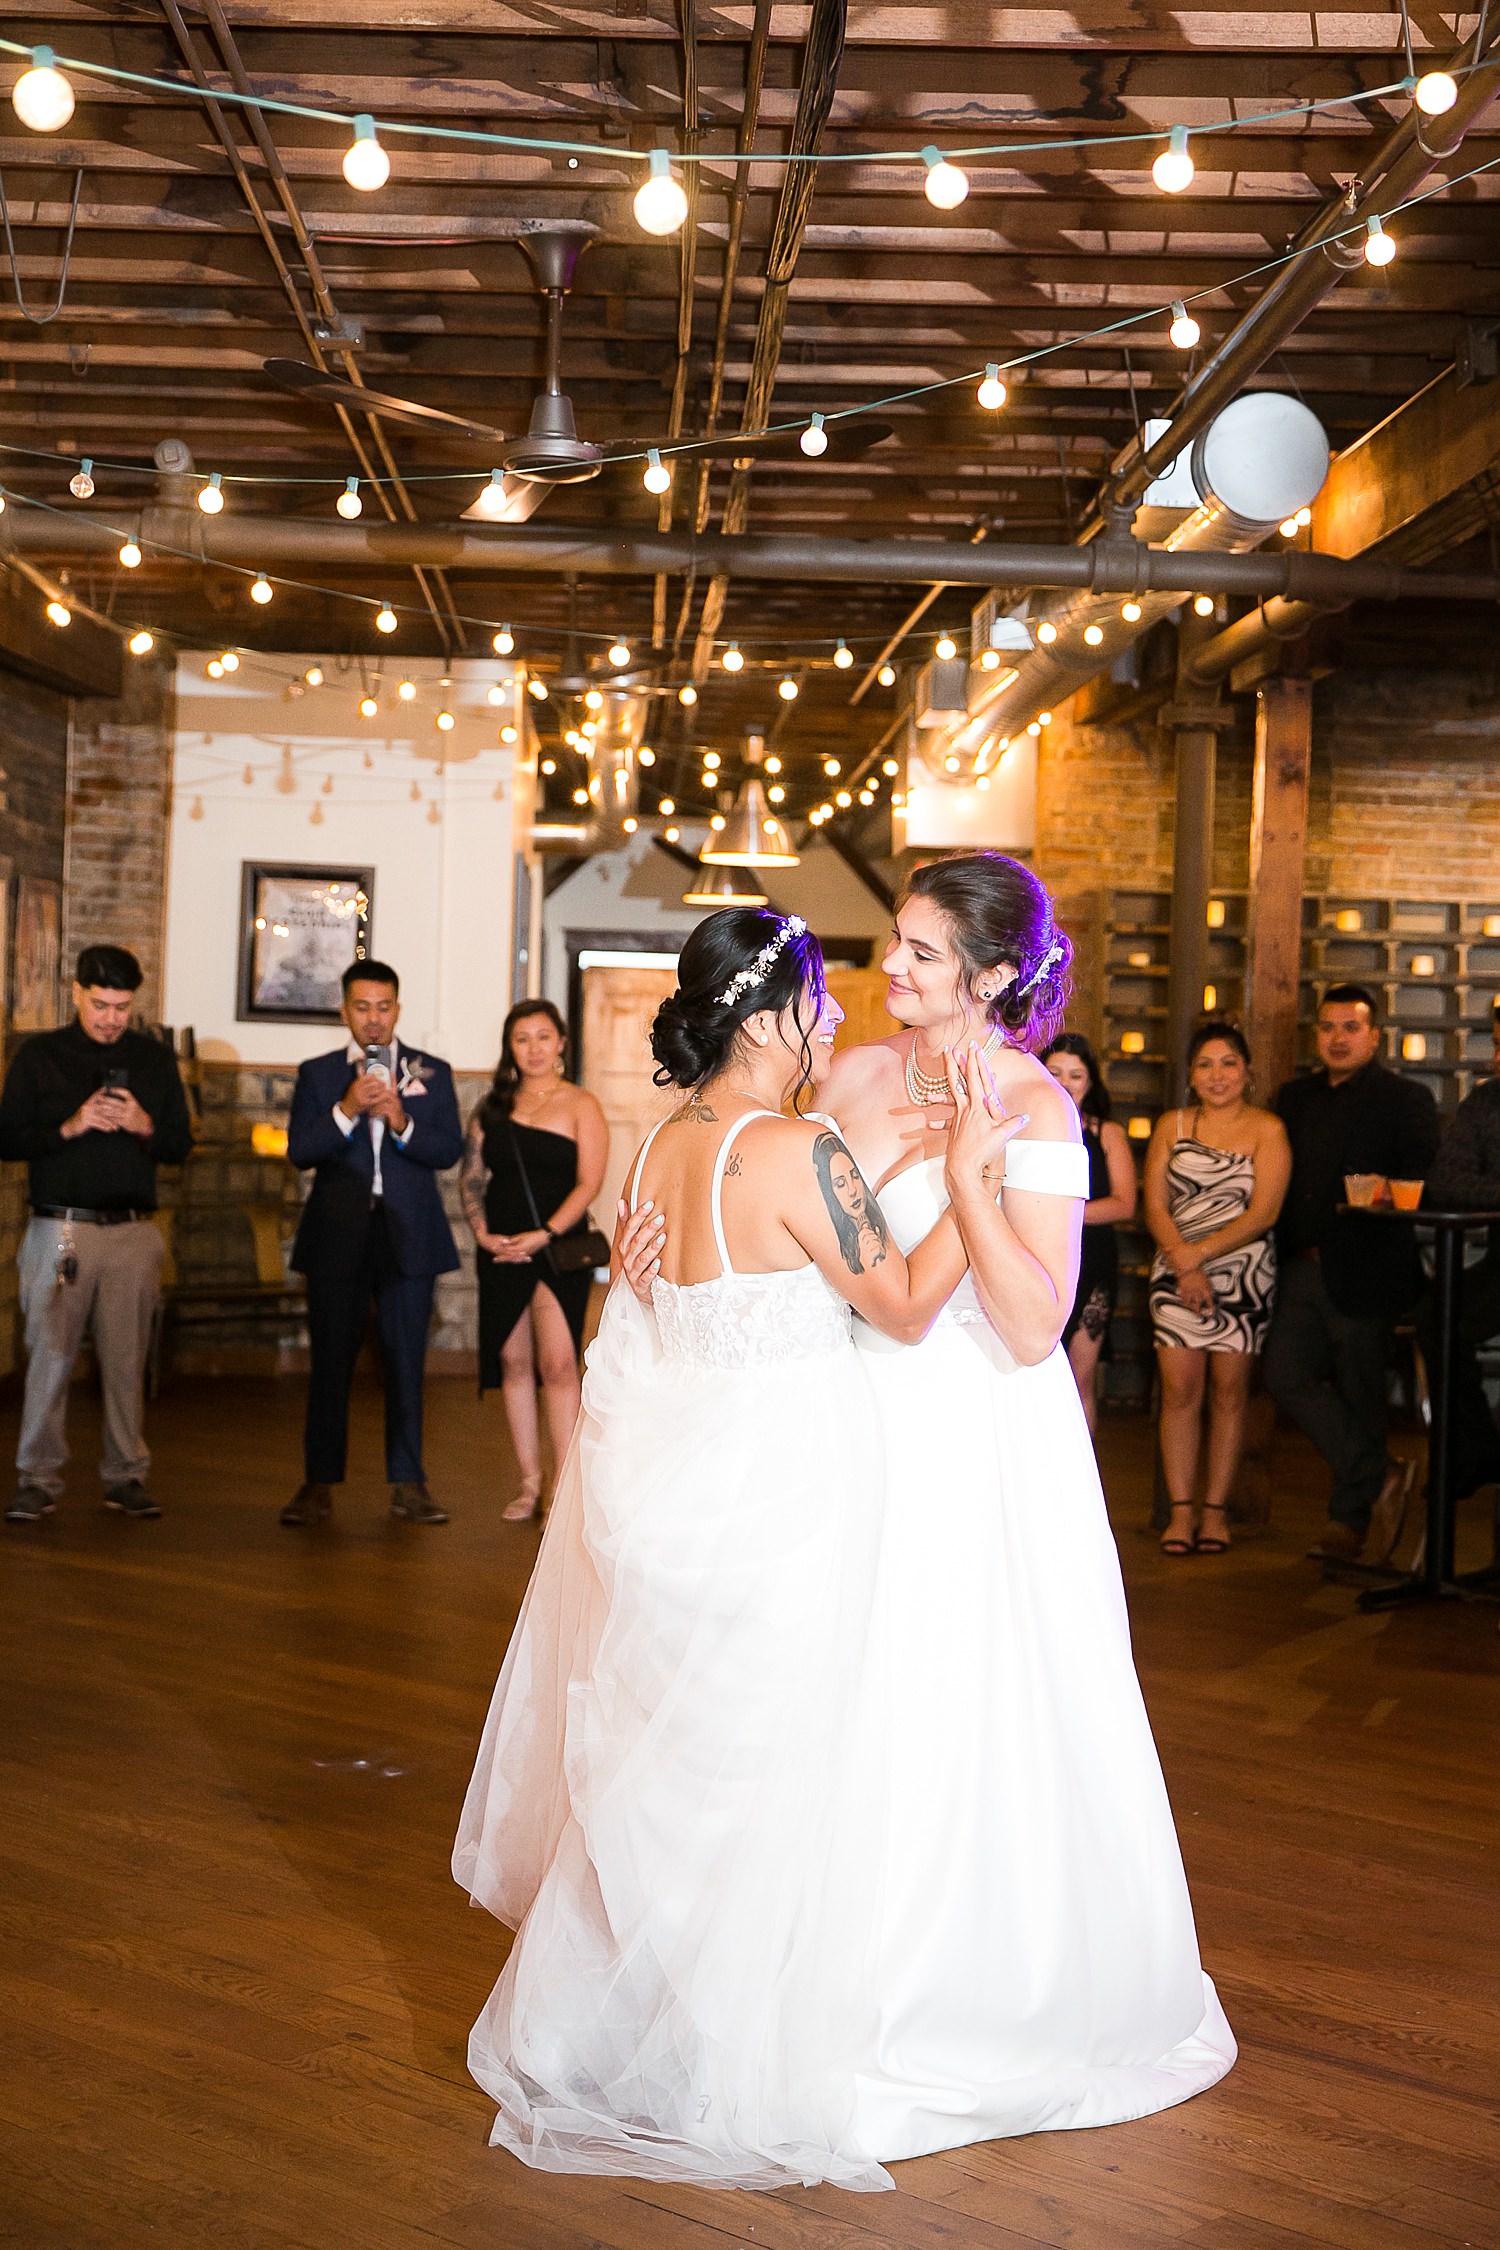 Brides have first dance at their wedding reception at The Haight.